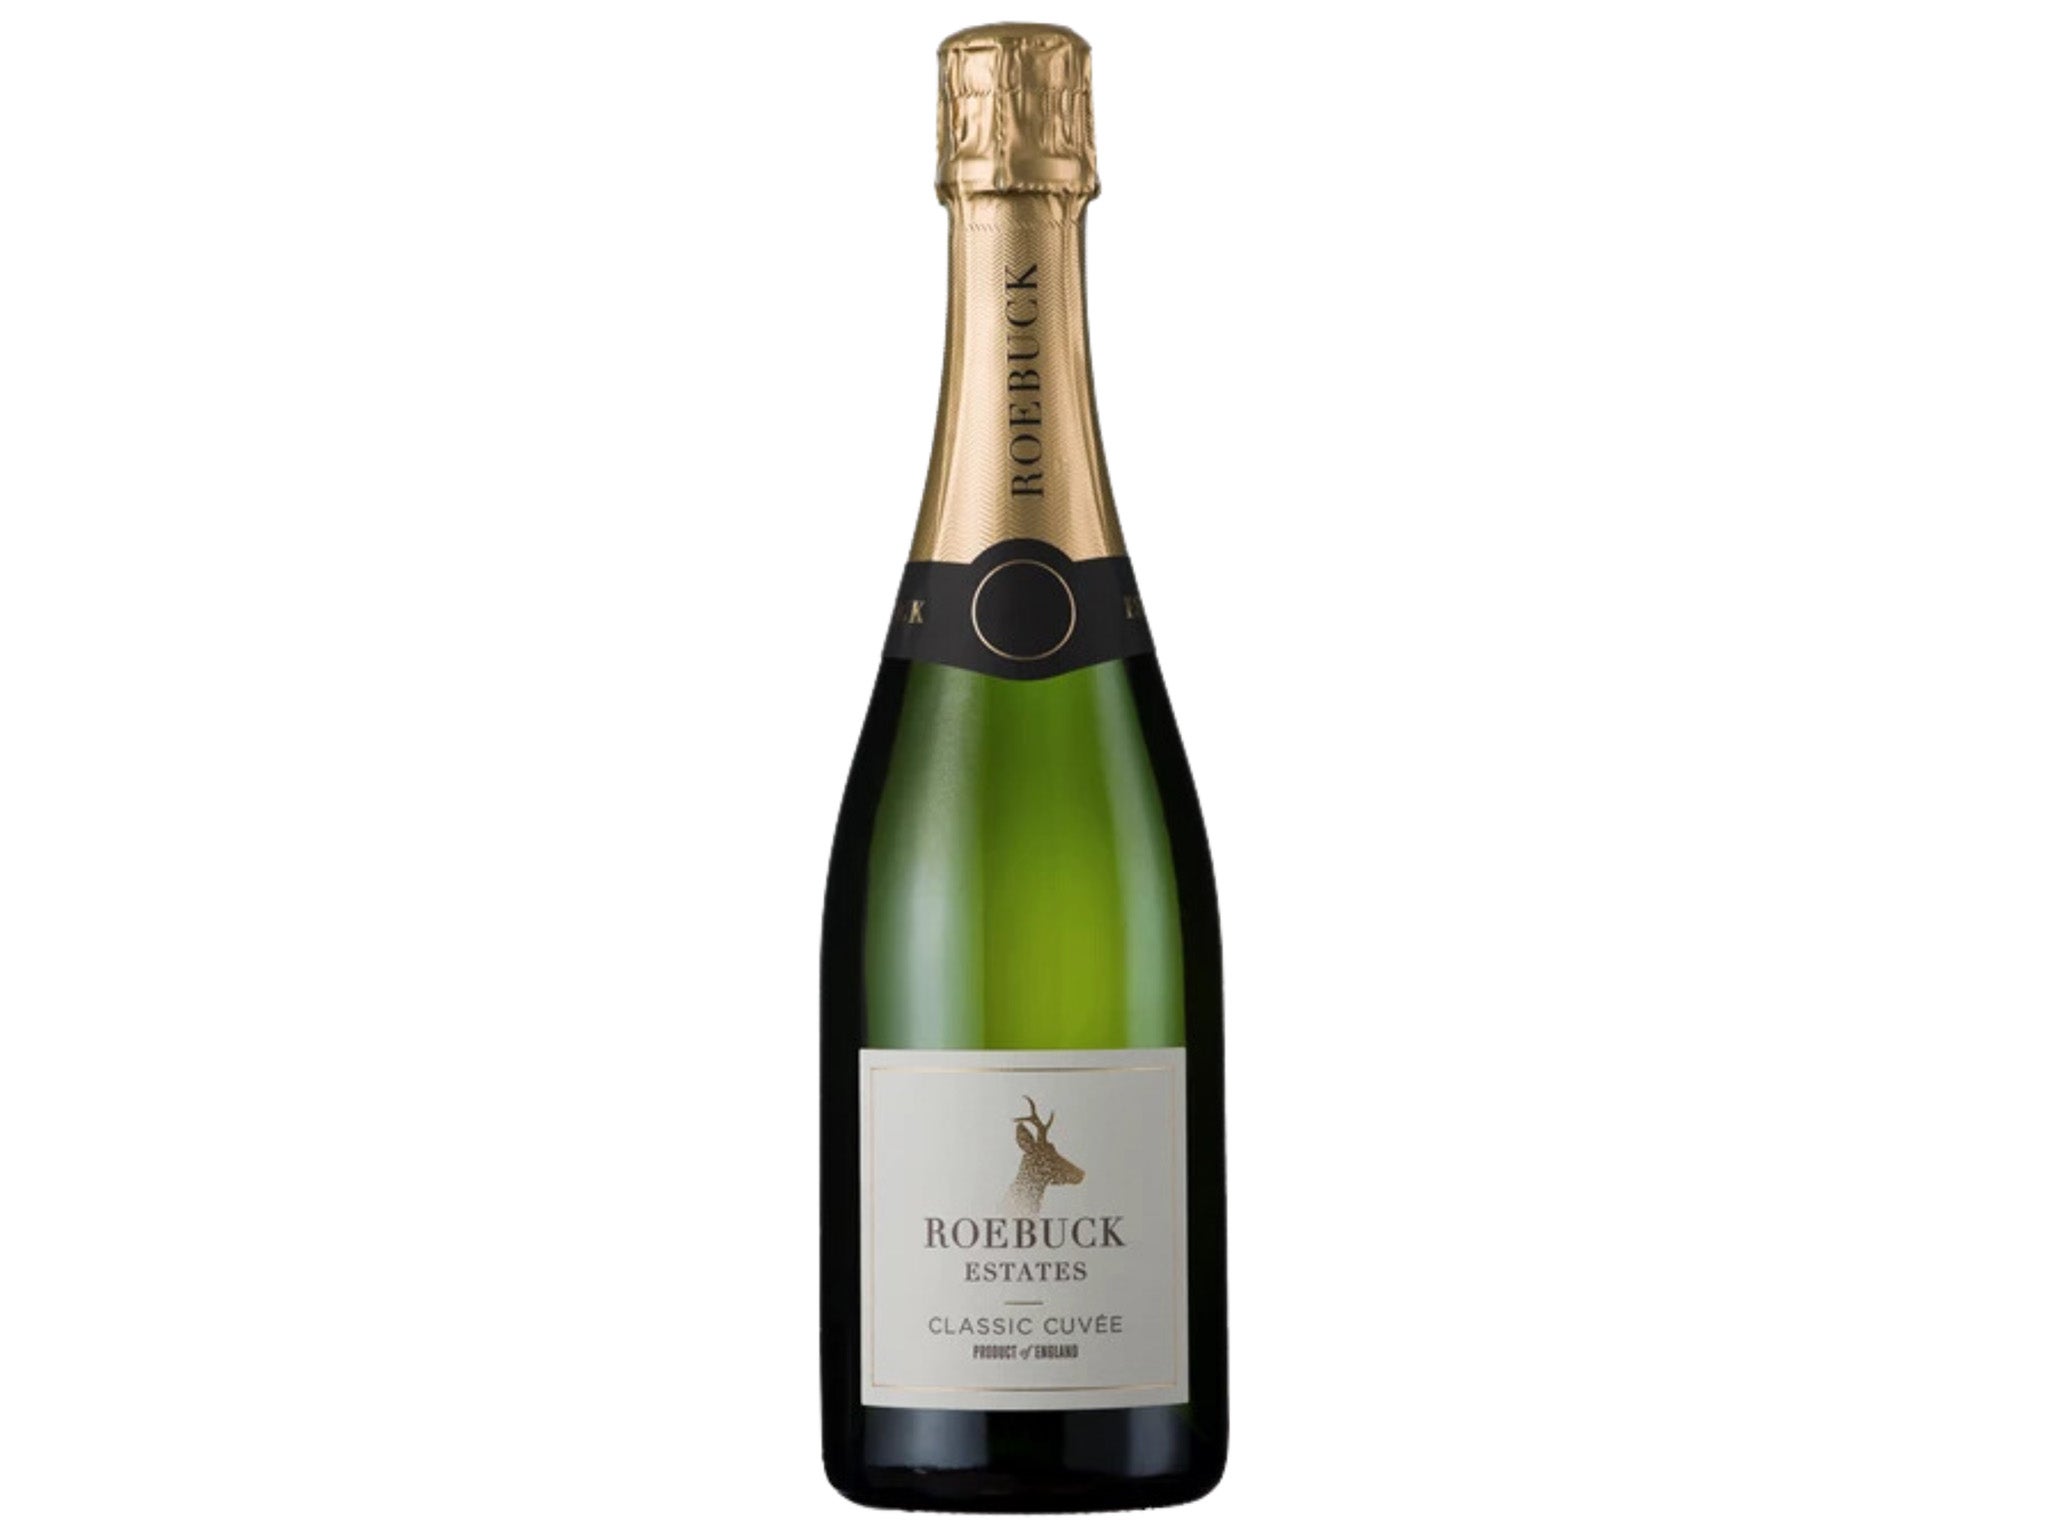 This Classic Cuvee proves English sparkling wine is on the up